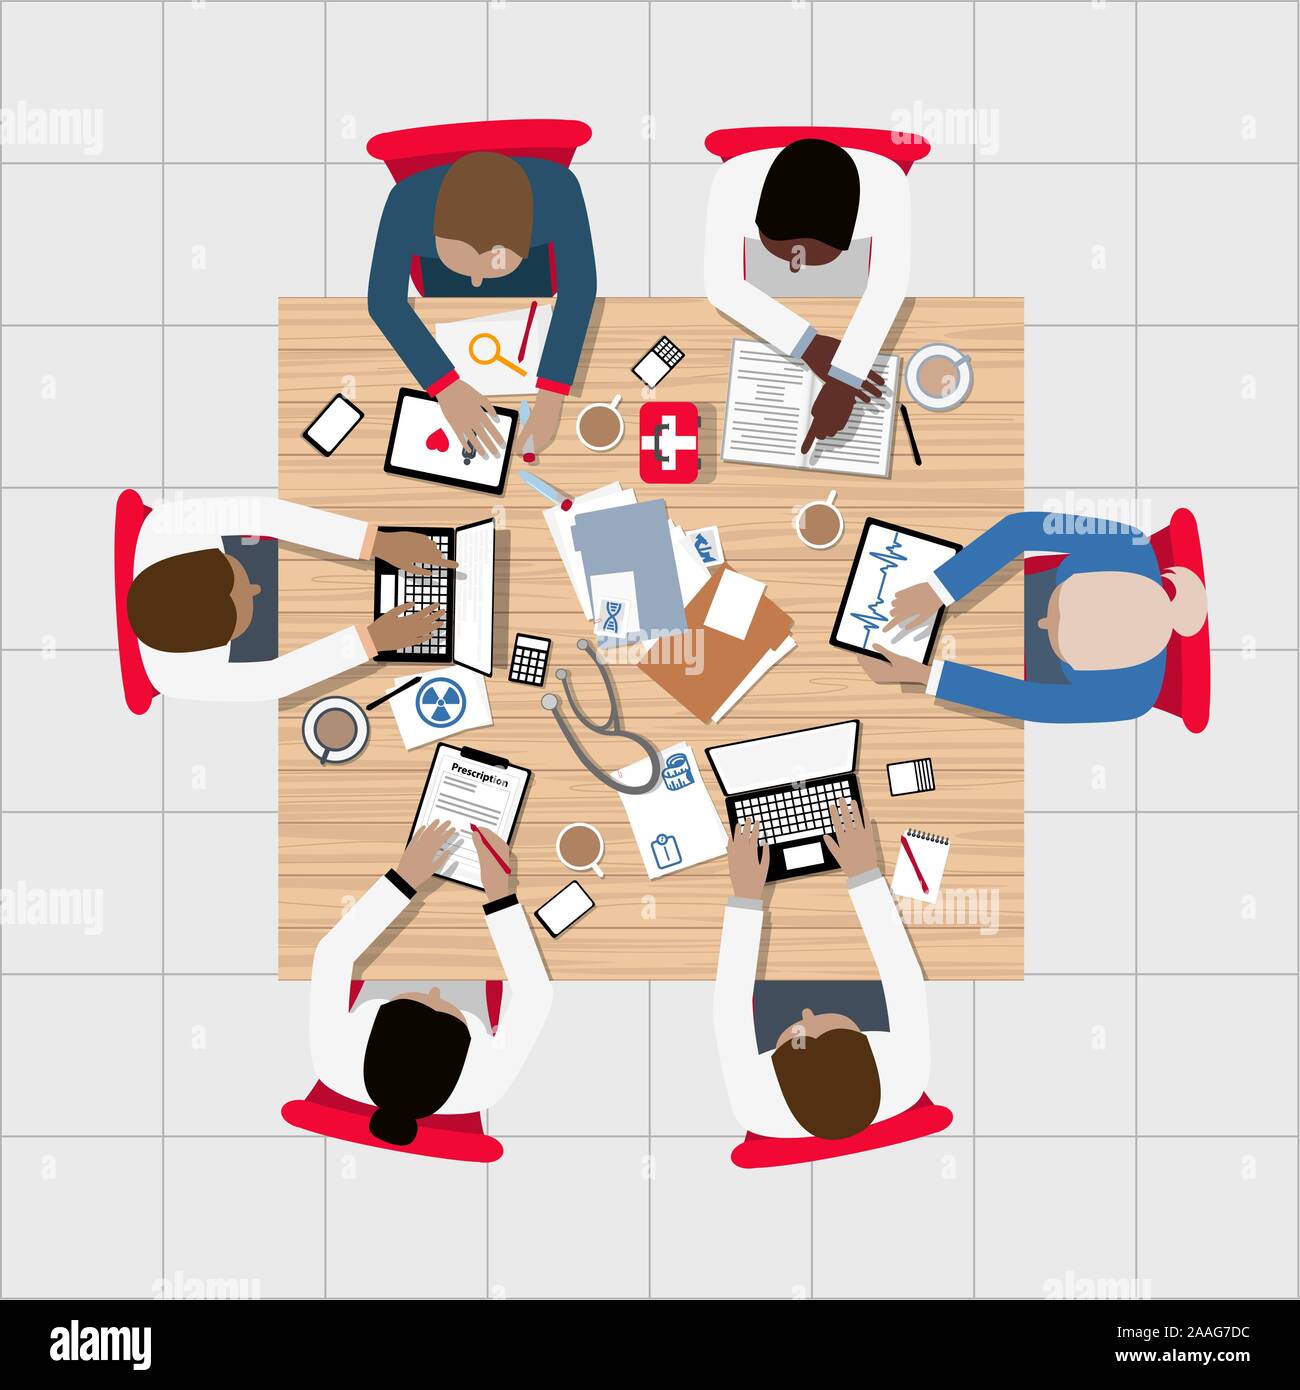 Doctors and Medical Professionals with diversity and equality Meeting around Boardroom Table - stethoscope and computers Stock Vector